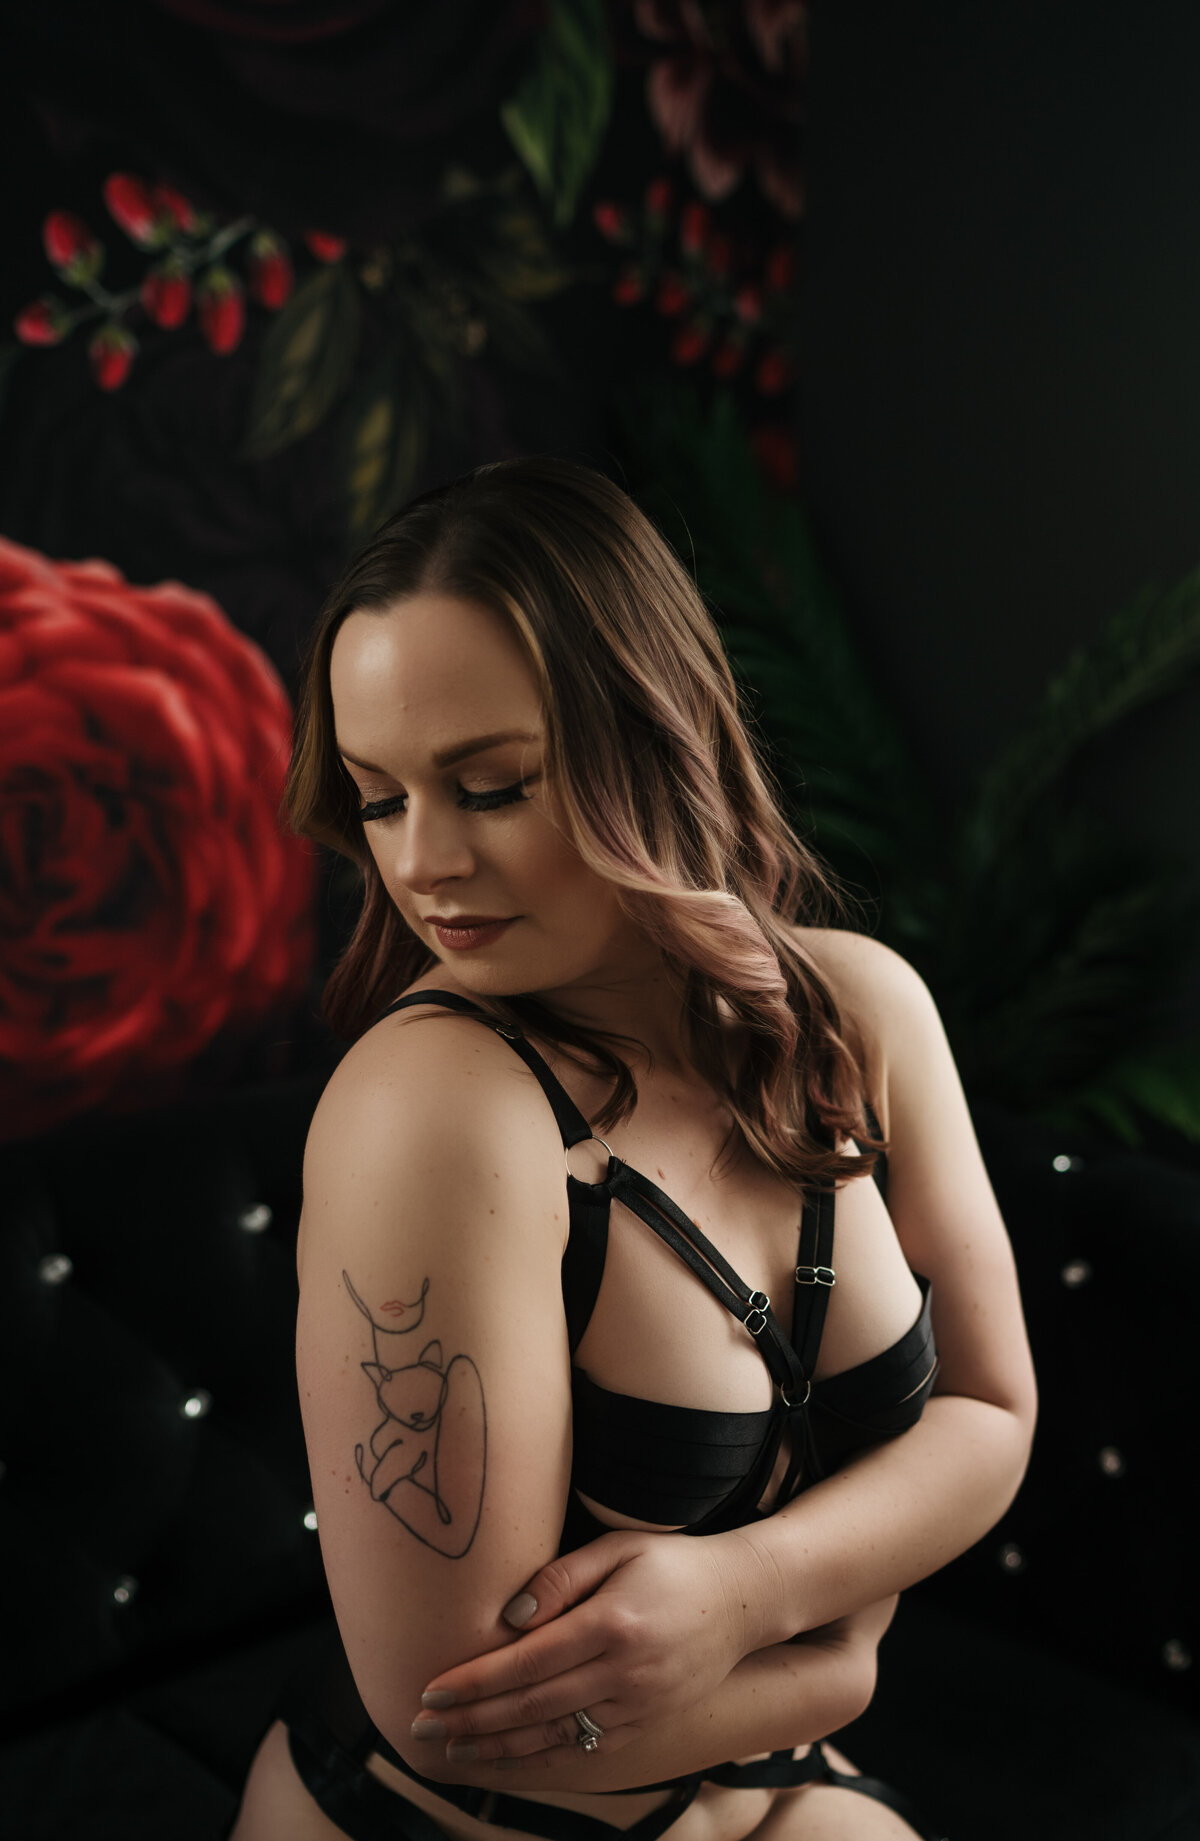 A woman in black strap lingerie gazes down her shoulder while sitting on a black couch in front of a rose tapestry in a studio